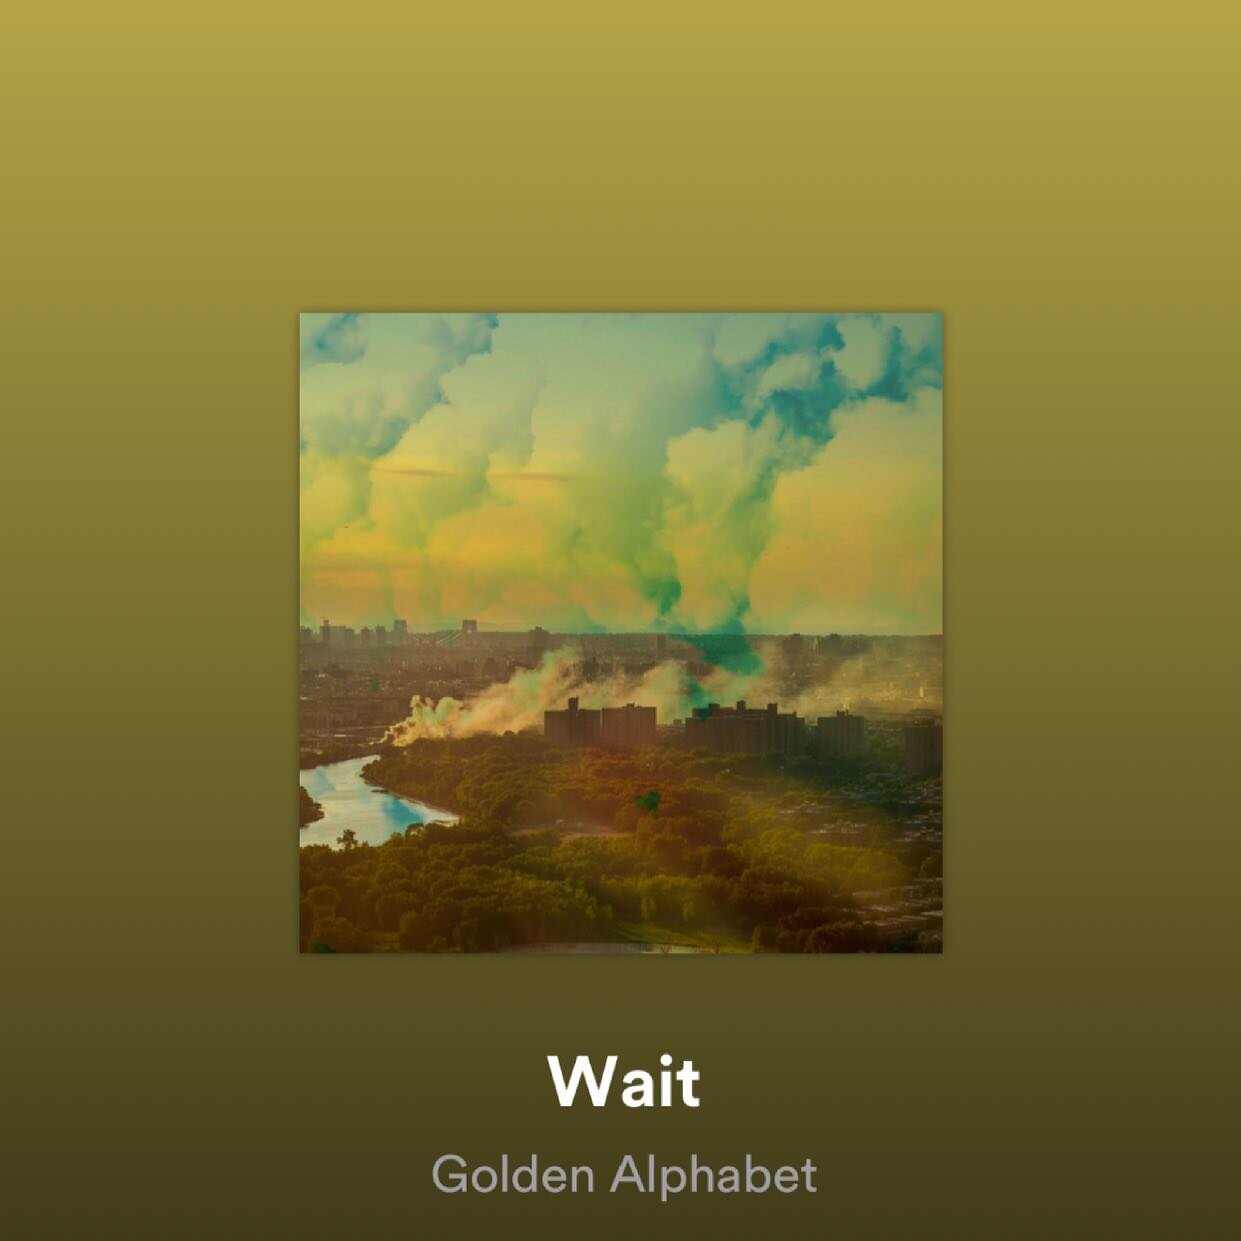 Wait. 
Wait. 
Listen to our song Wait.
Don&rsquo;t tell me,
That you haven&rsquo;t. 
Link in bio
#wait
@goldenalphabet